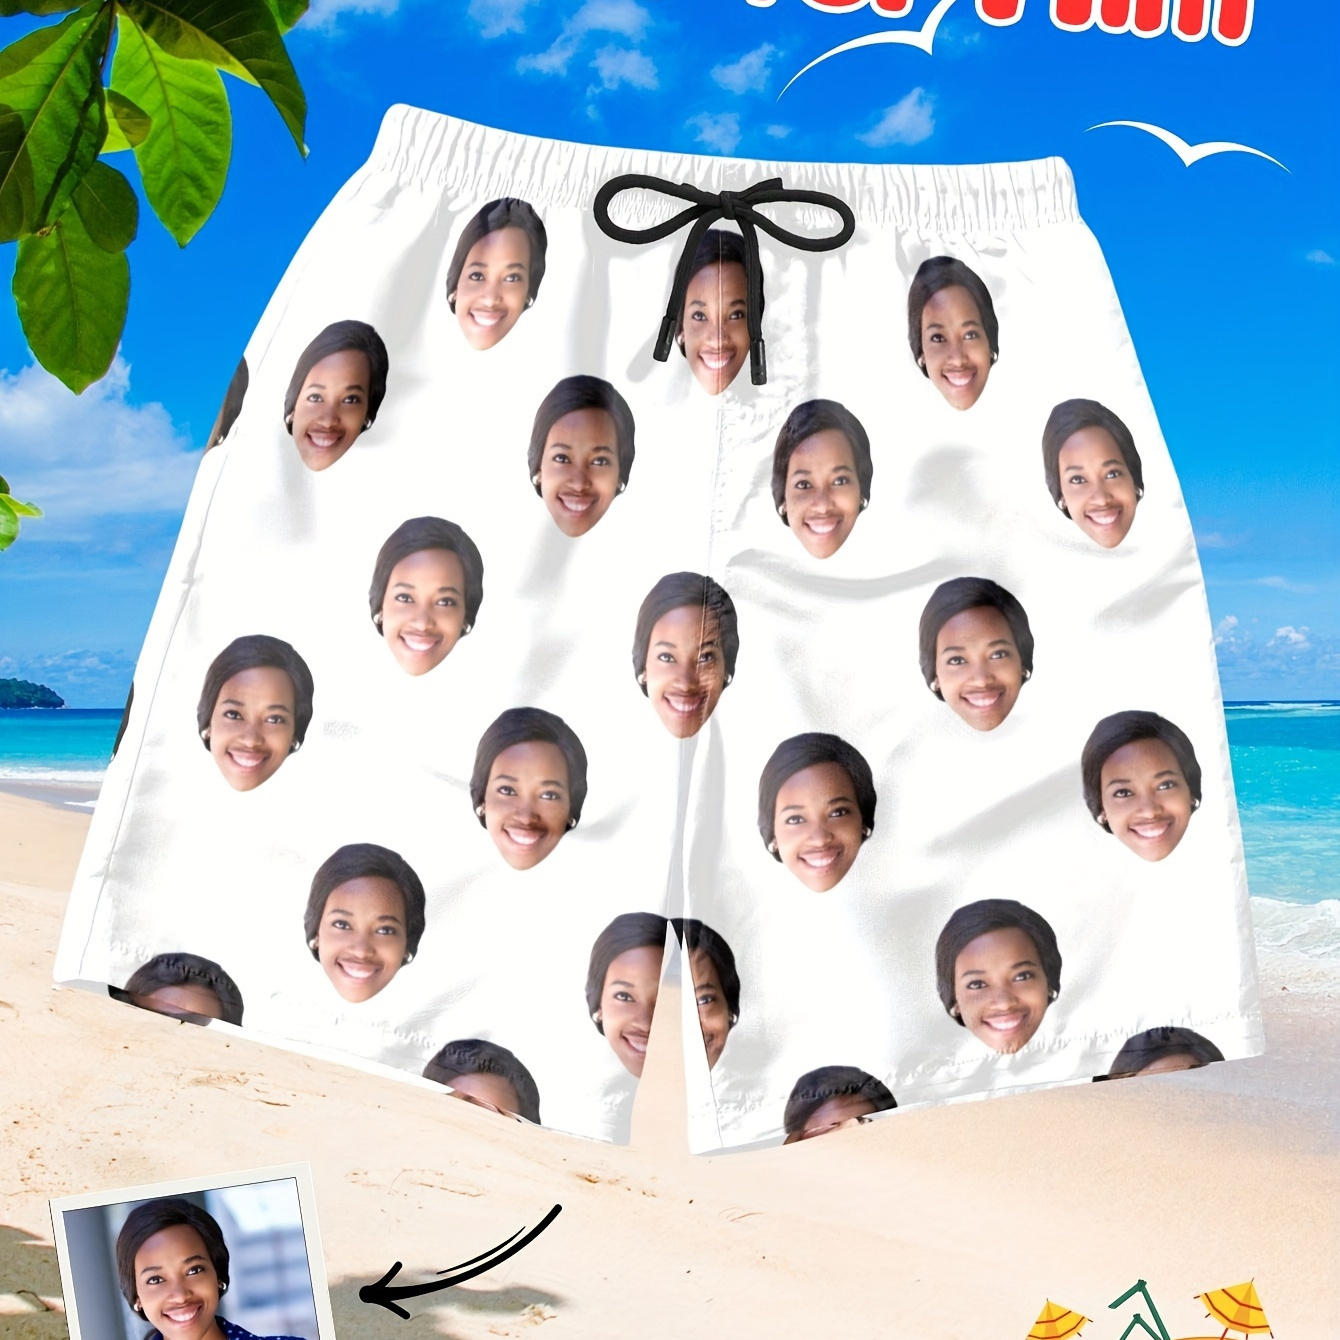 

Customized Shorts With Personalized Portrait Photo Print, Stylish And Novel Board Shorts For Men's Summer Party Wear, Comfy And Breathable Shorts As Gifts